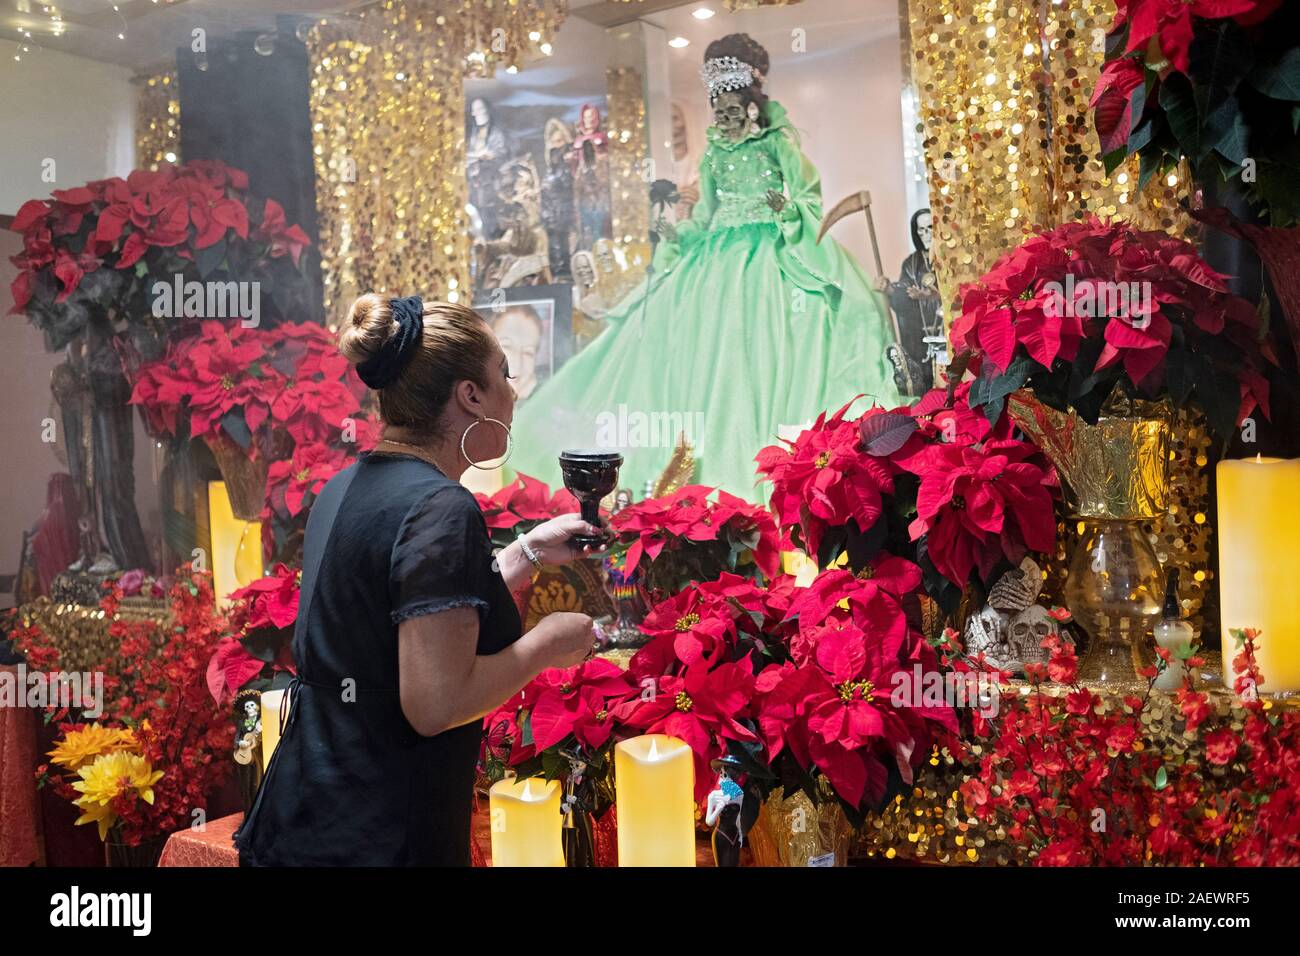 A Santa Muerte priestess leads a service in her home temple in Jackson Heights, Queens, New York City. She blows smoke at a deity as is a custom. Stock Photo